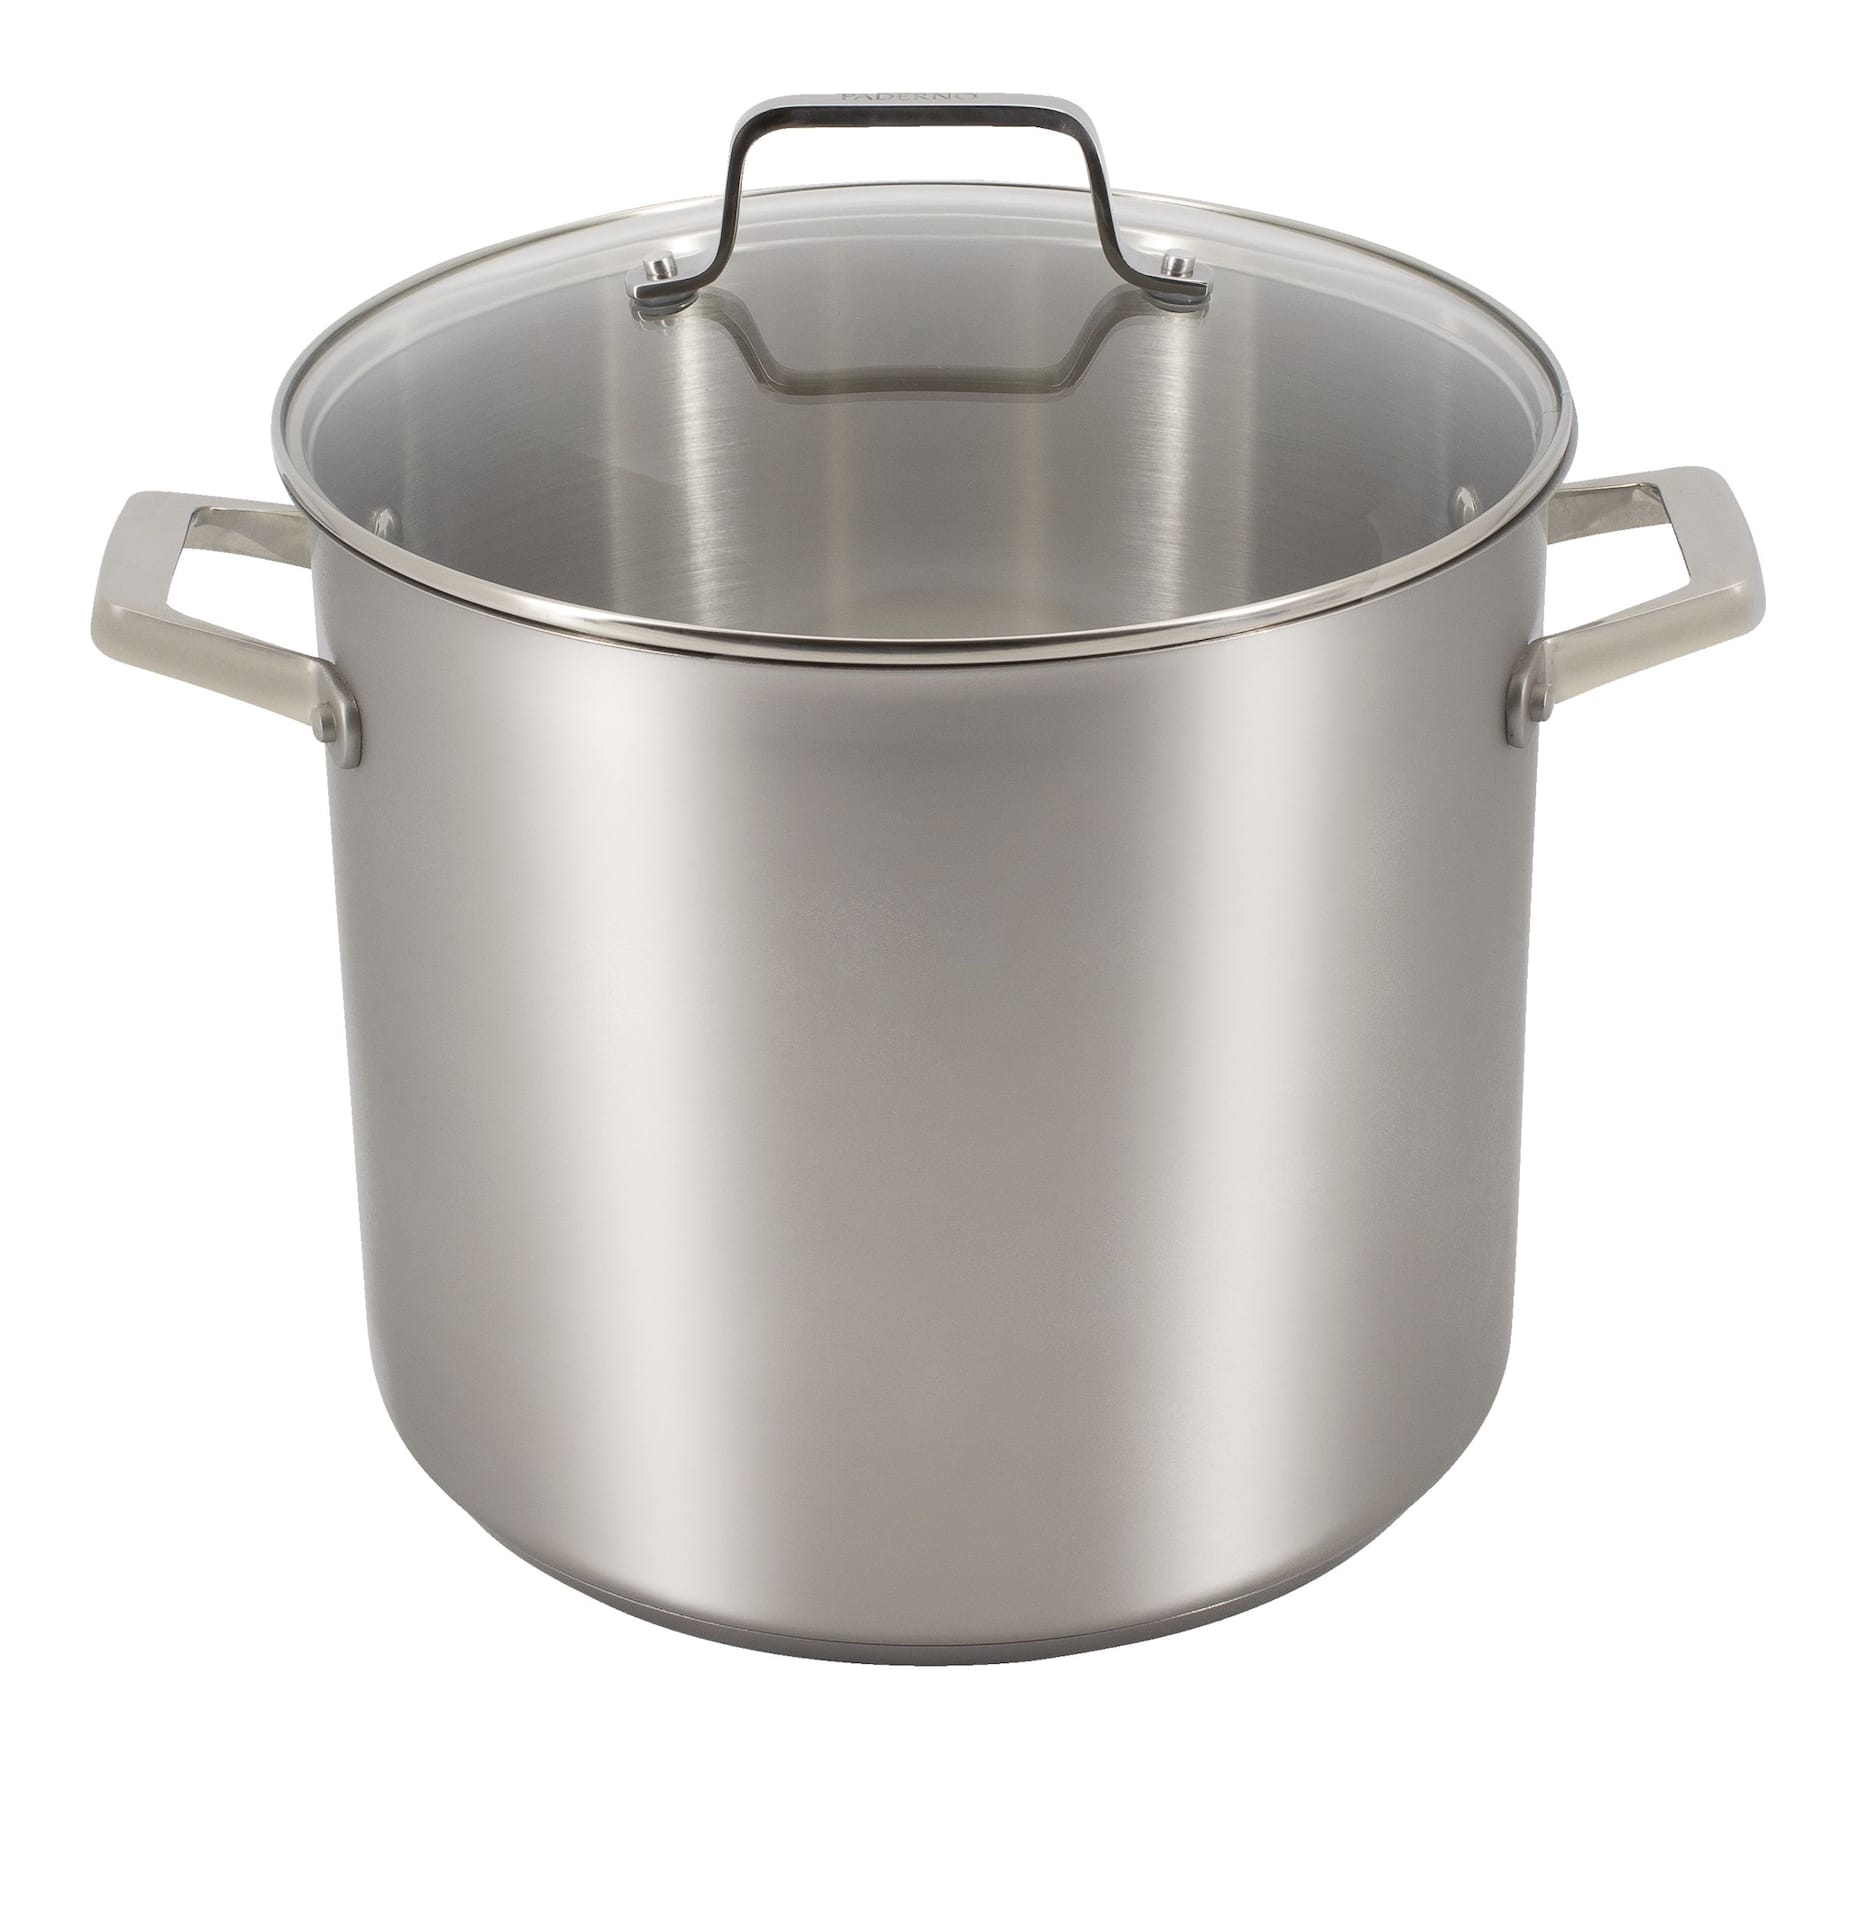 Paderno Stainless Steel 1 7/8 Quart Rondeau Pot